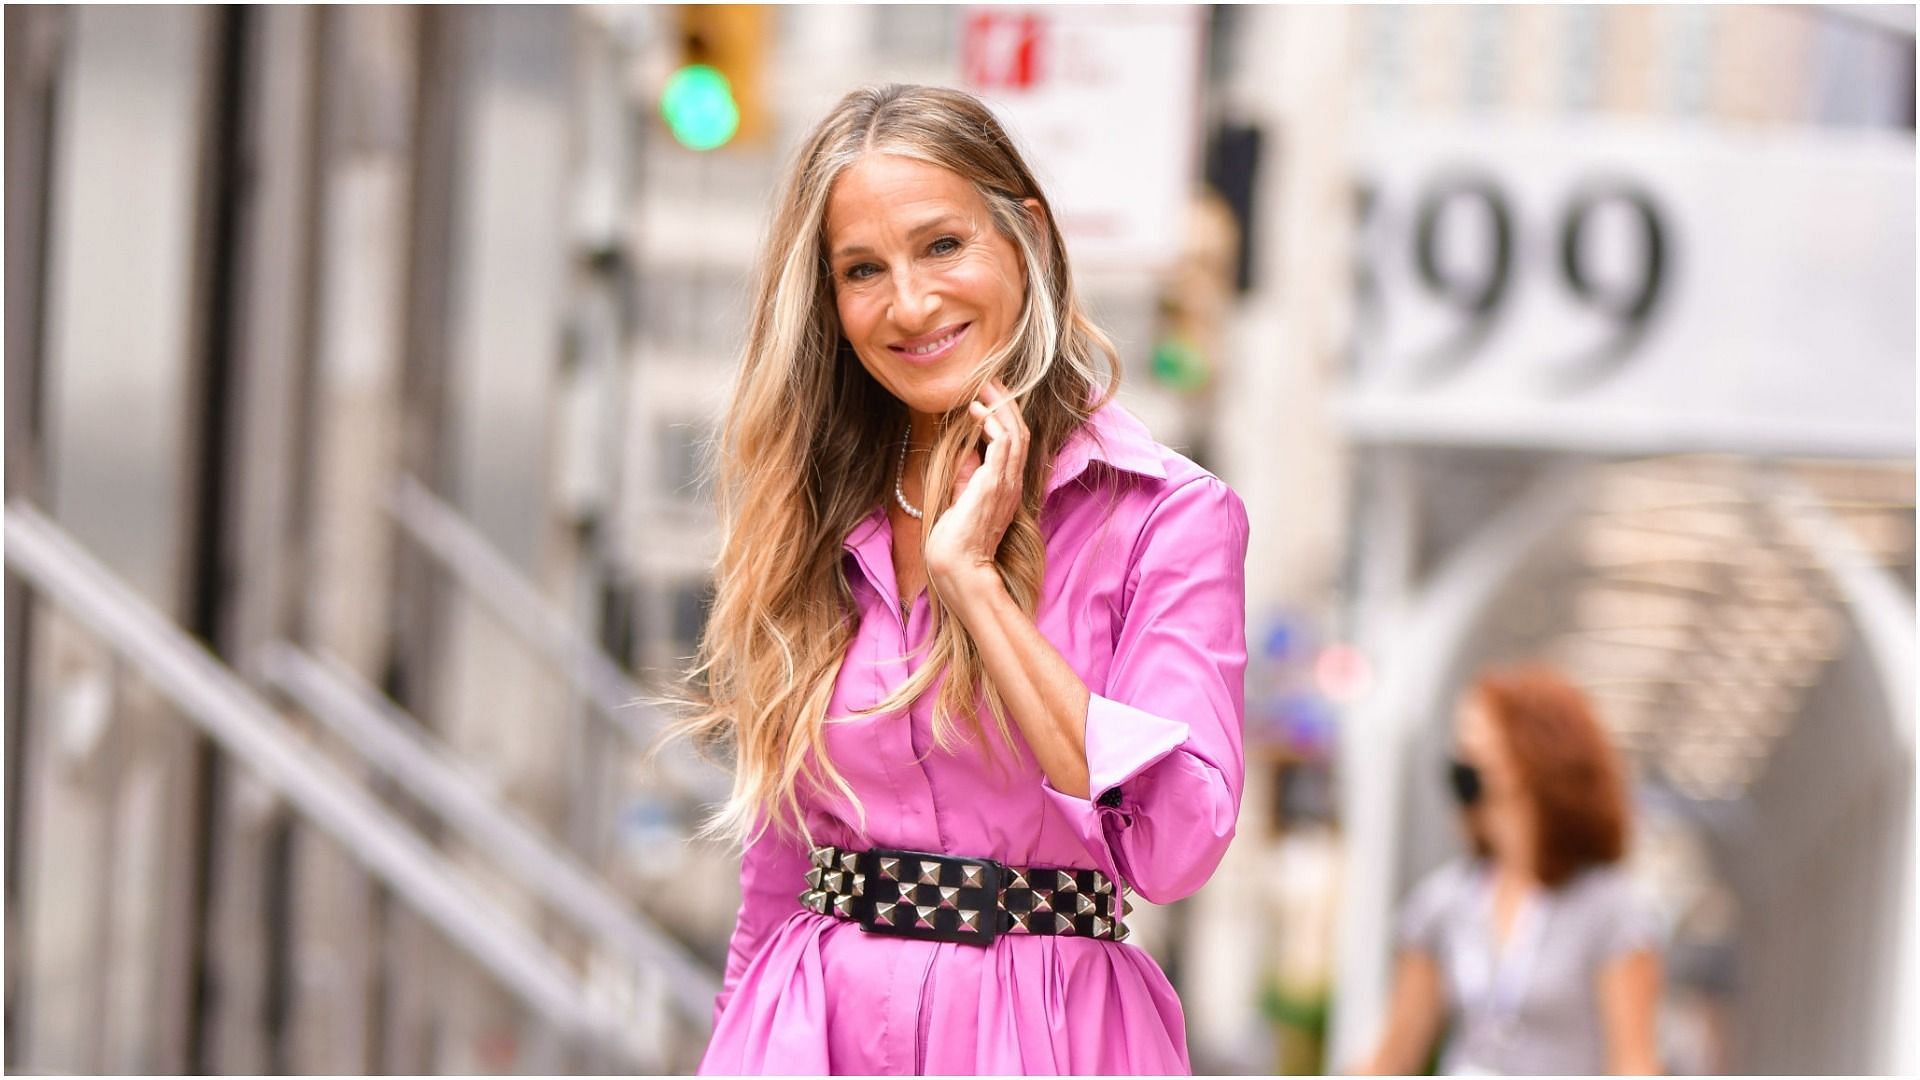 Sarah Jessica Parker seen on the set of &#039;And Just Like That...&#039; the follow-up series to &#039;Sex and the City&#039; in NoHo on July 19, 2021, in New York City (Image via Getty Images)